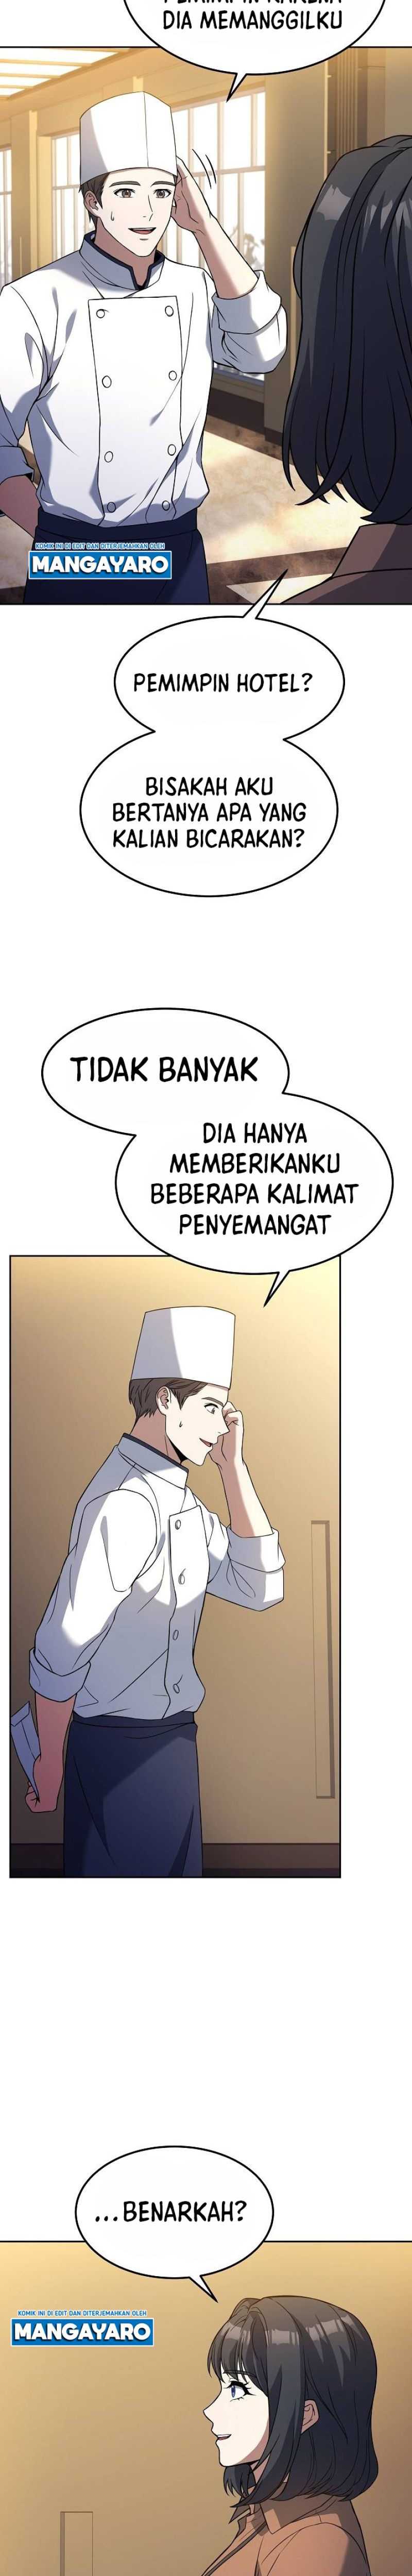 Youngest Chef From the 3rd Rate Hotel Chapter 56